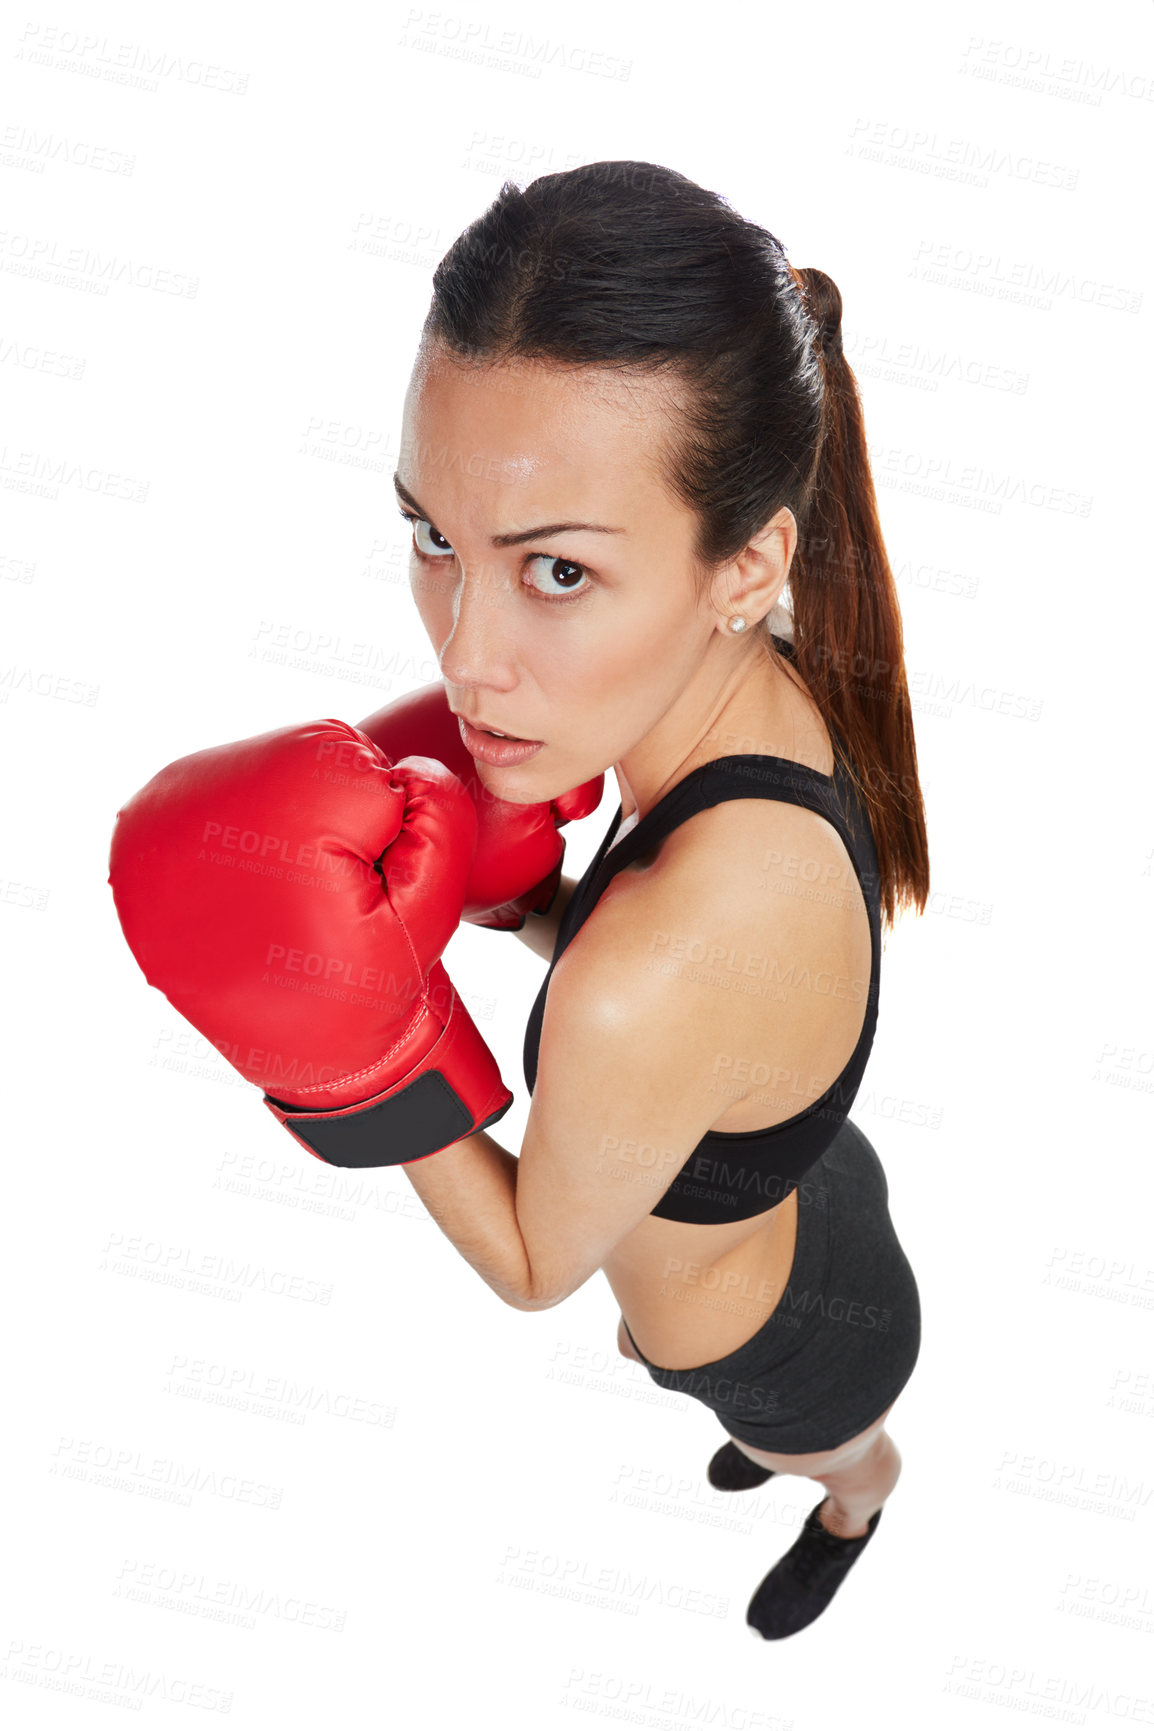 Buy stock photo High angle portrait of a young female athlete boxing against a white background